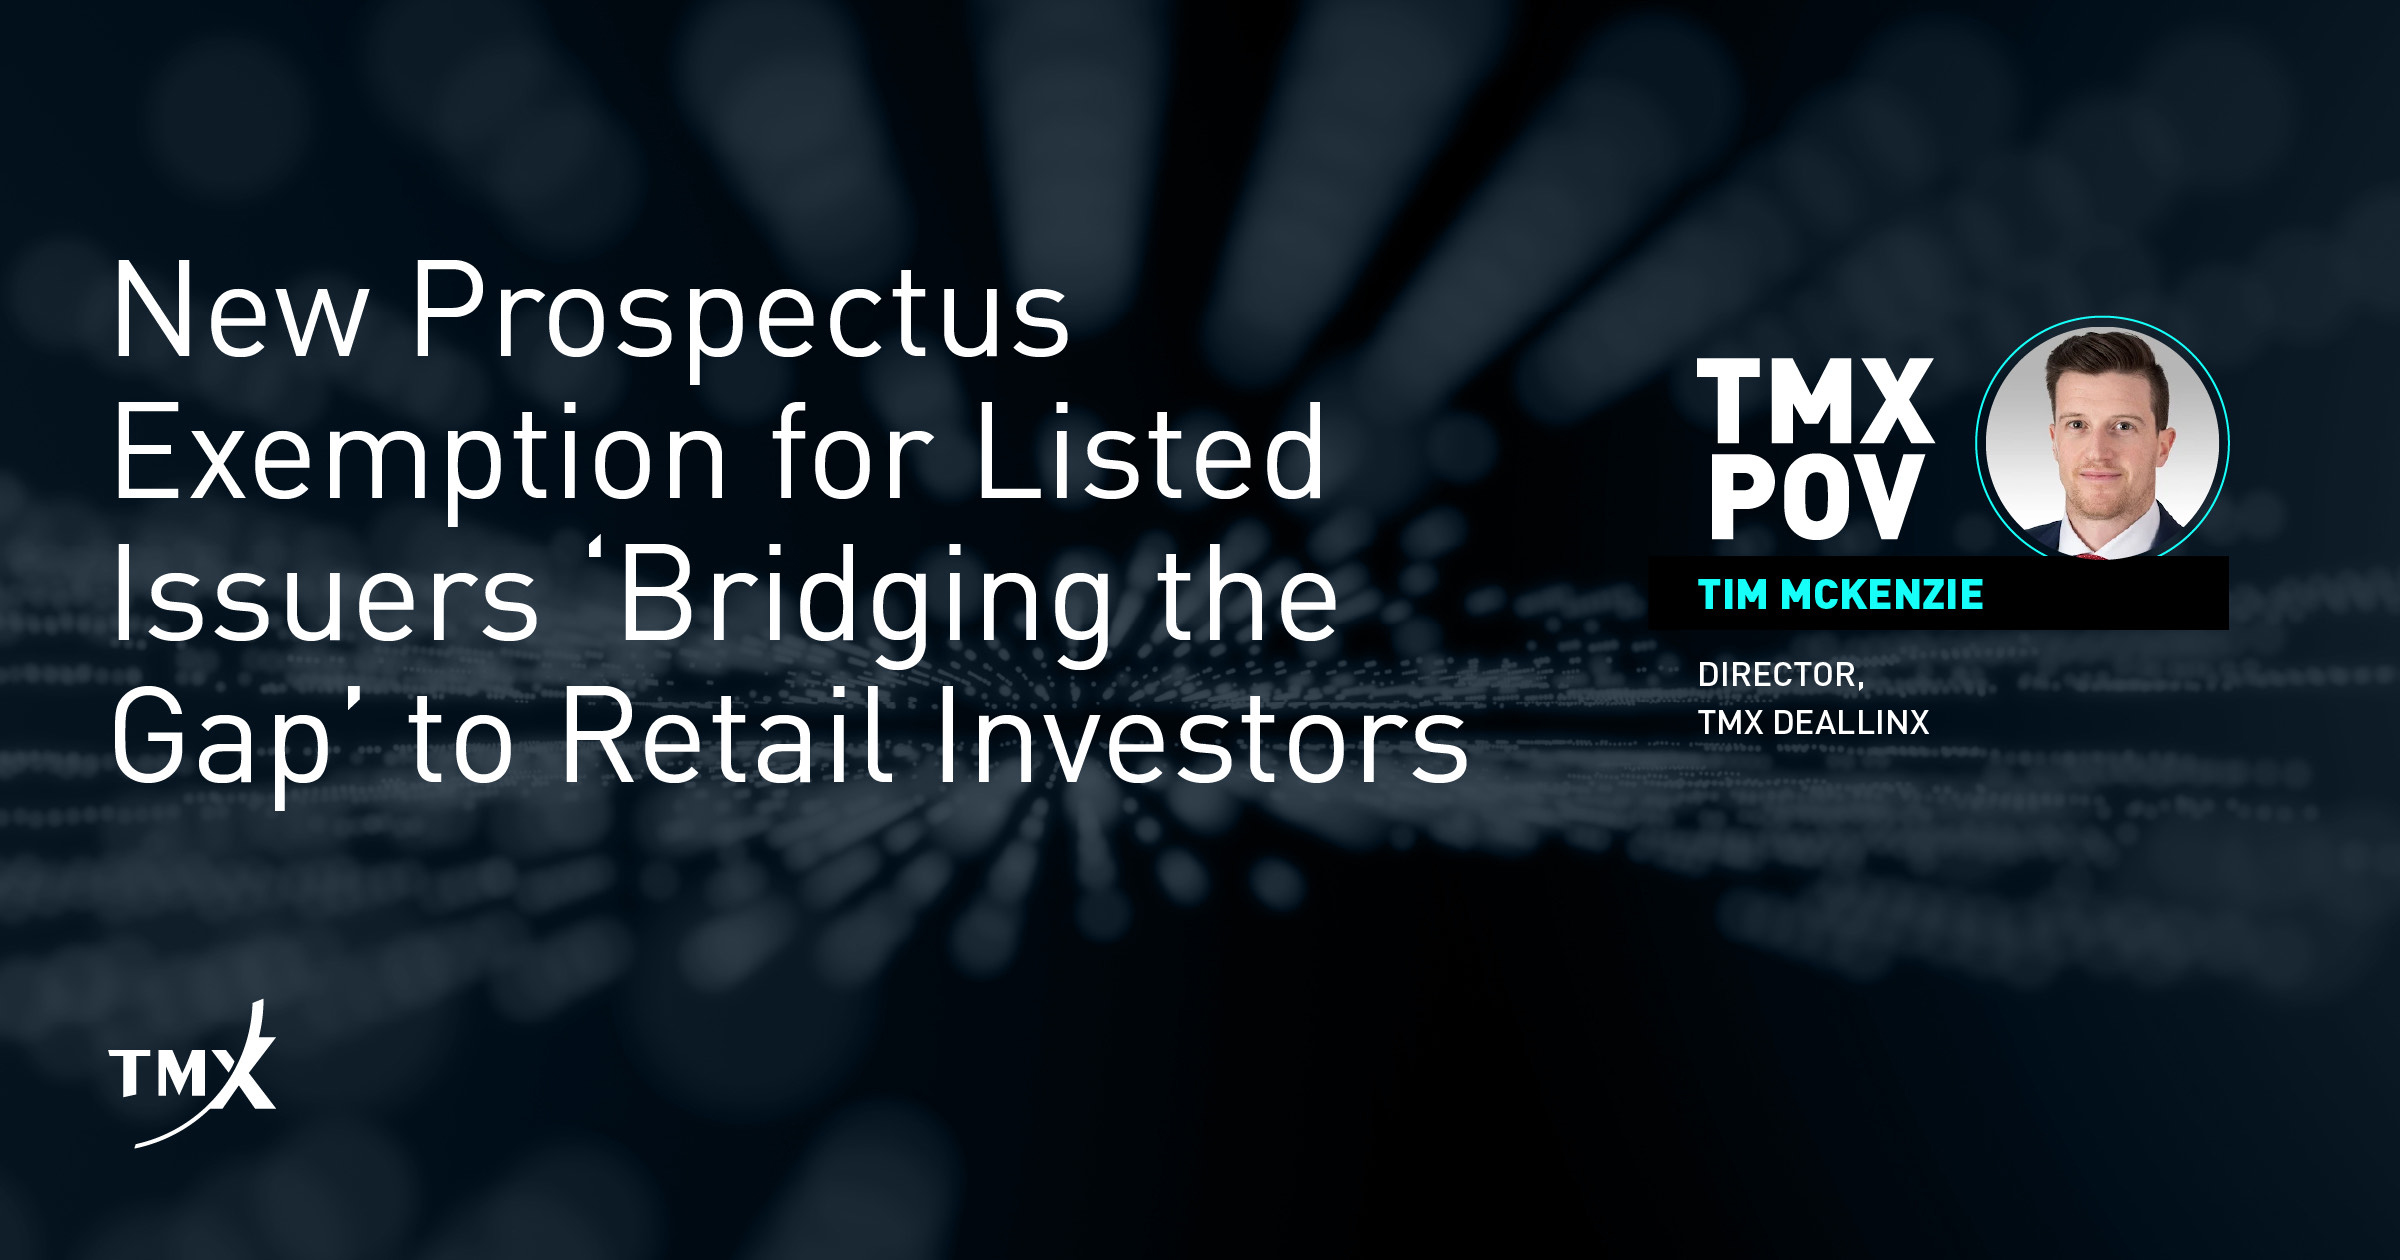 TMX POV - New Prospectus Exemption for Listed Issuers ‘Bridging the Gap’ to Retail Investors